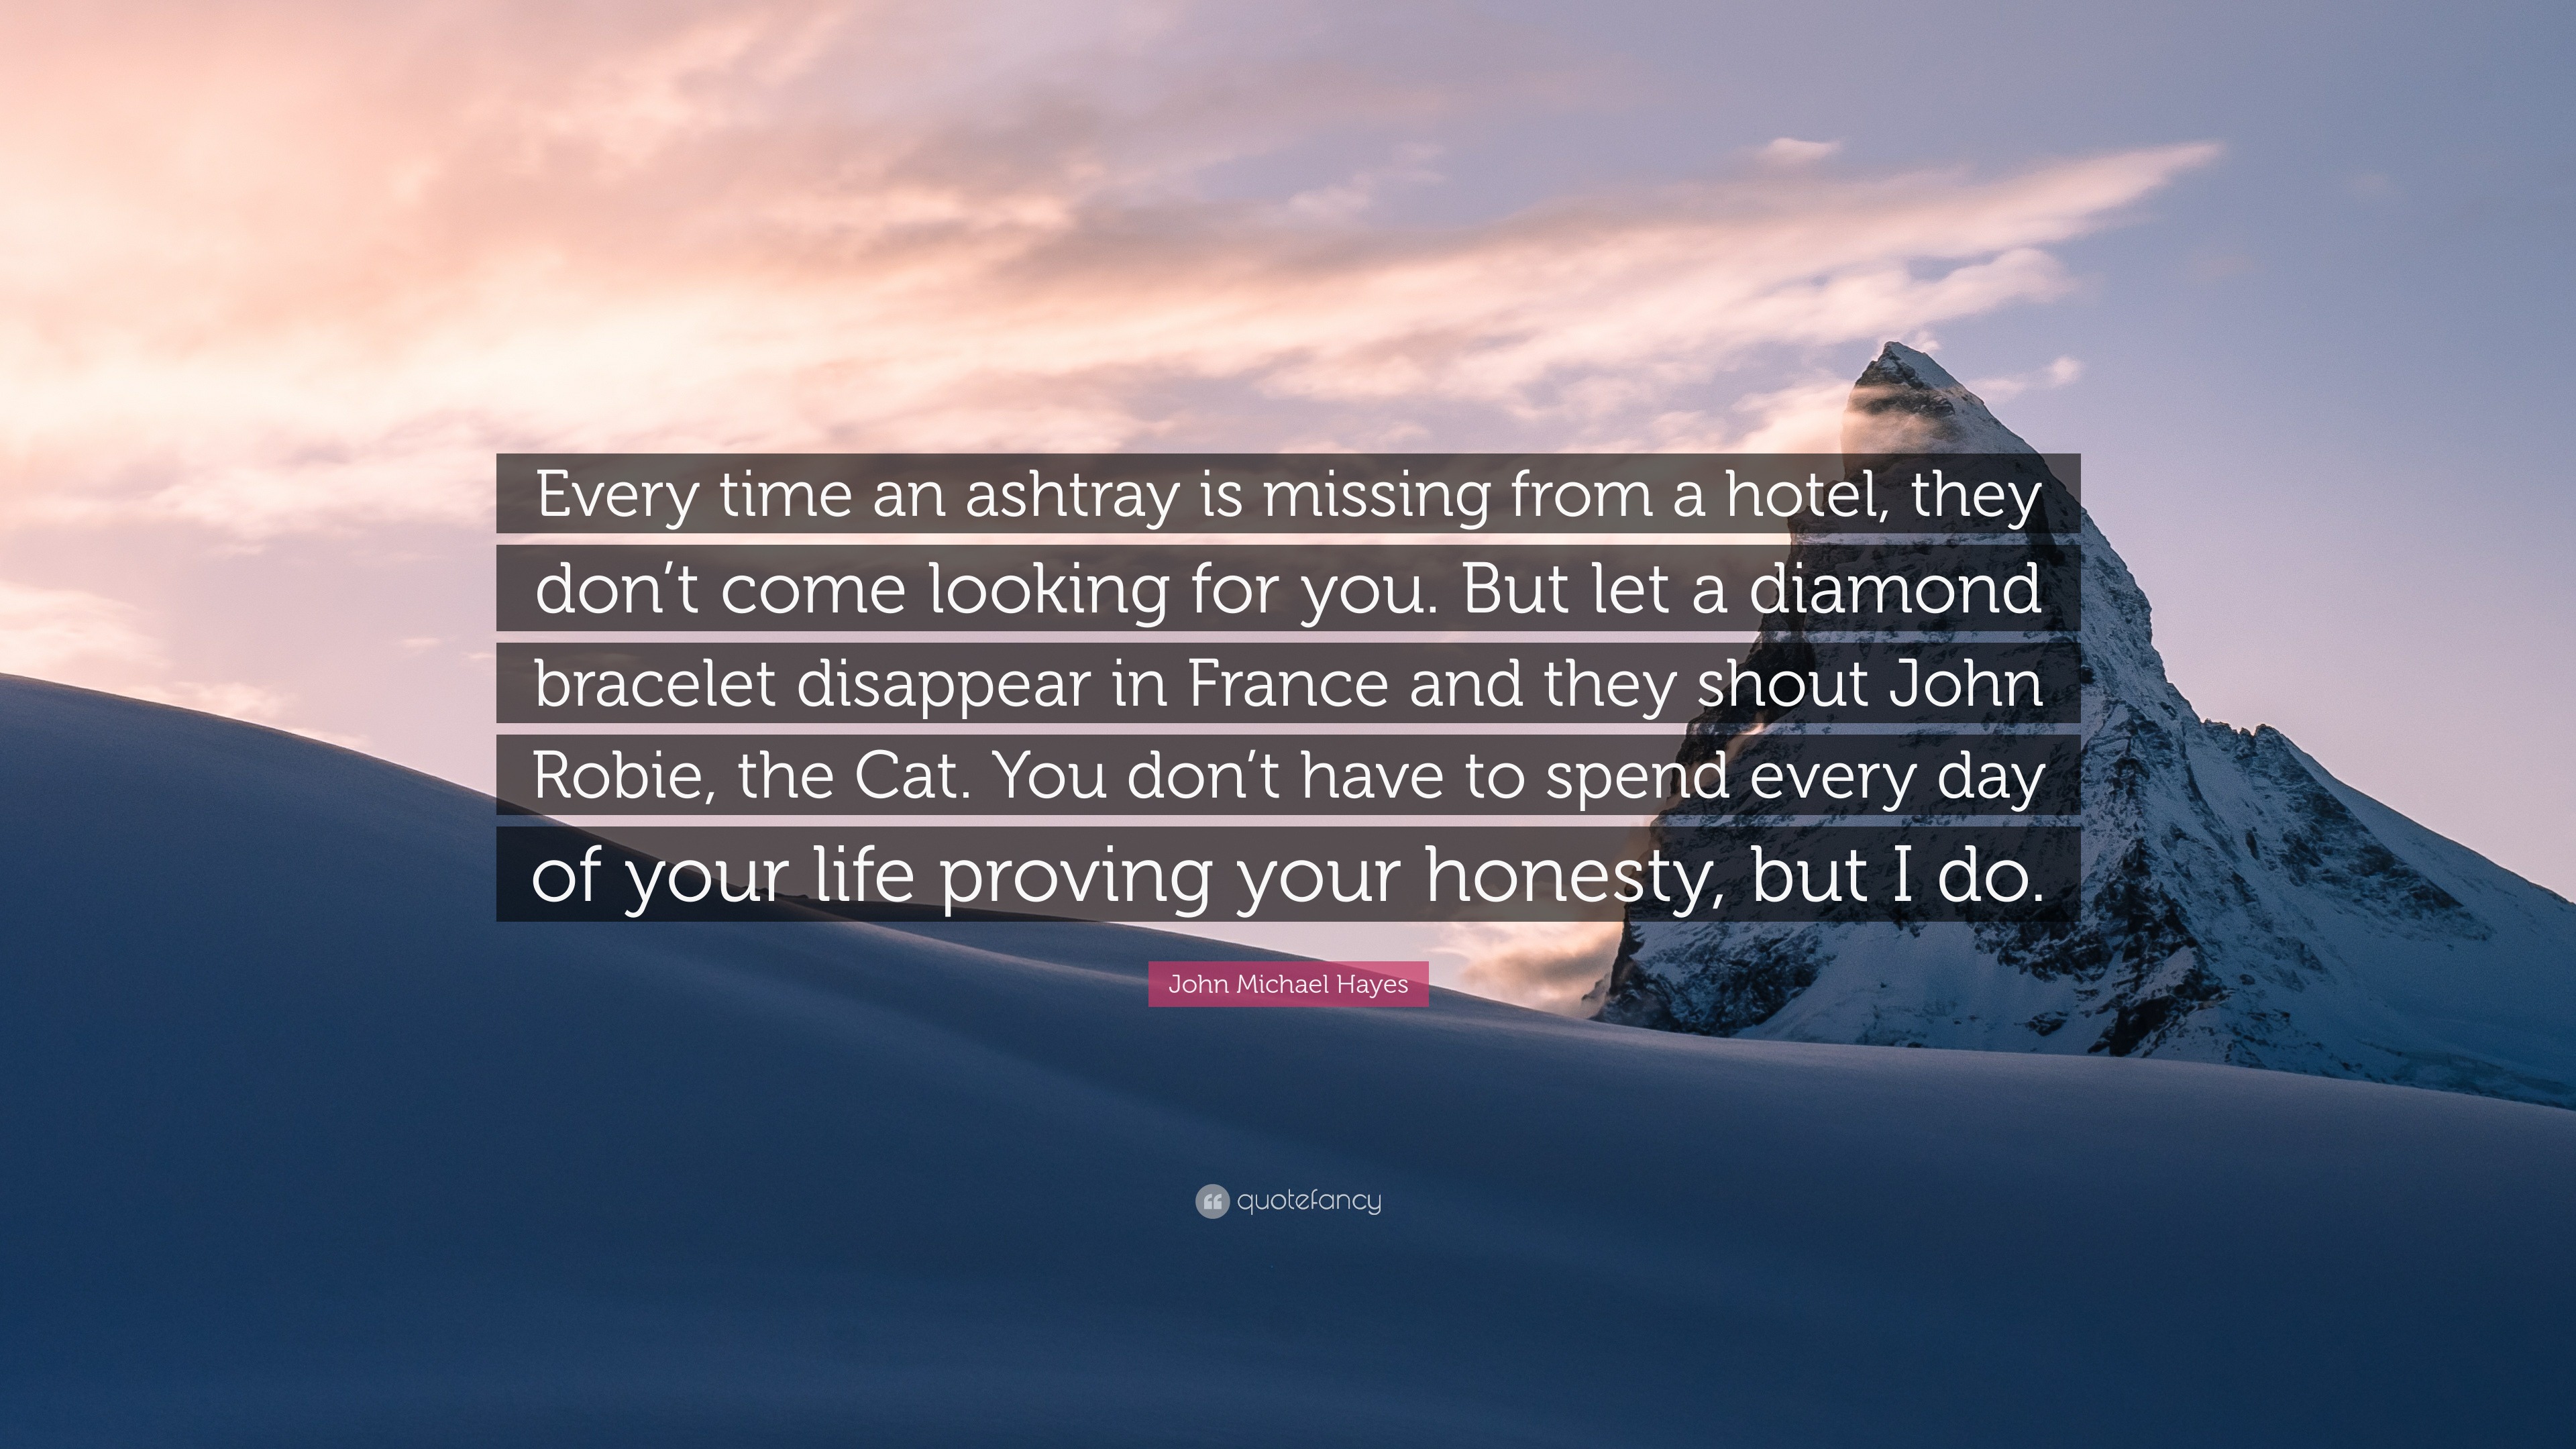 https://quotefancy.com/media/wallpaper/3840x2160/3267534-John-Michael-Hayes-Quote-Every-time-an-ashtray-is-missing-from-a.jpg